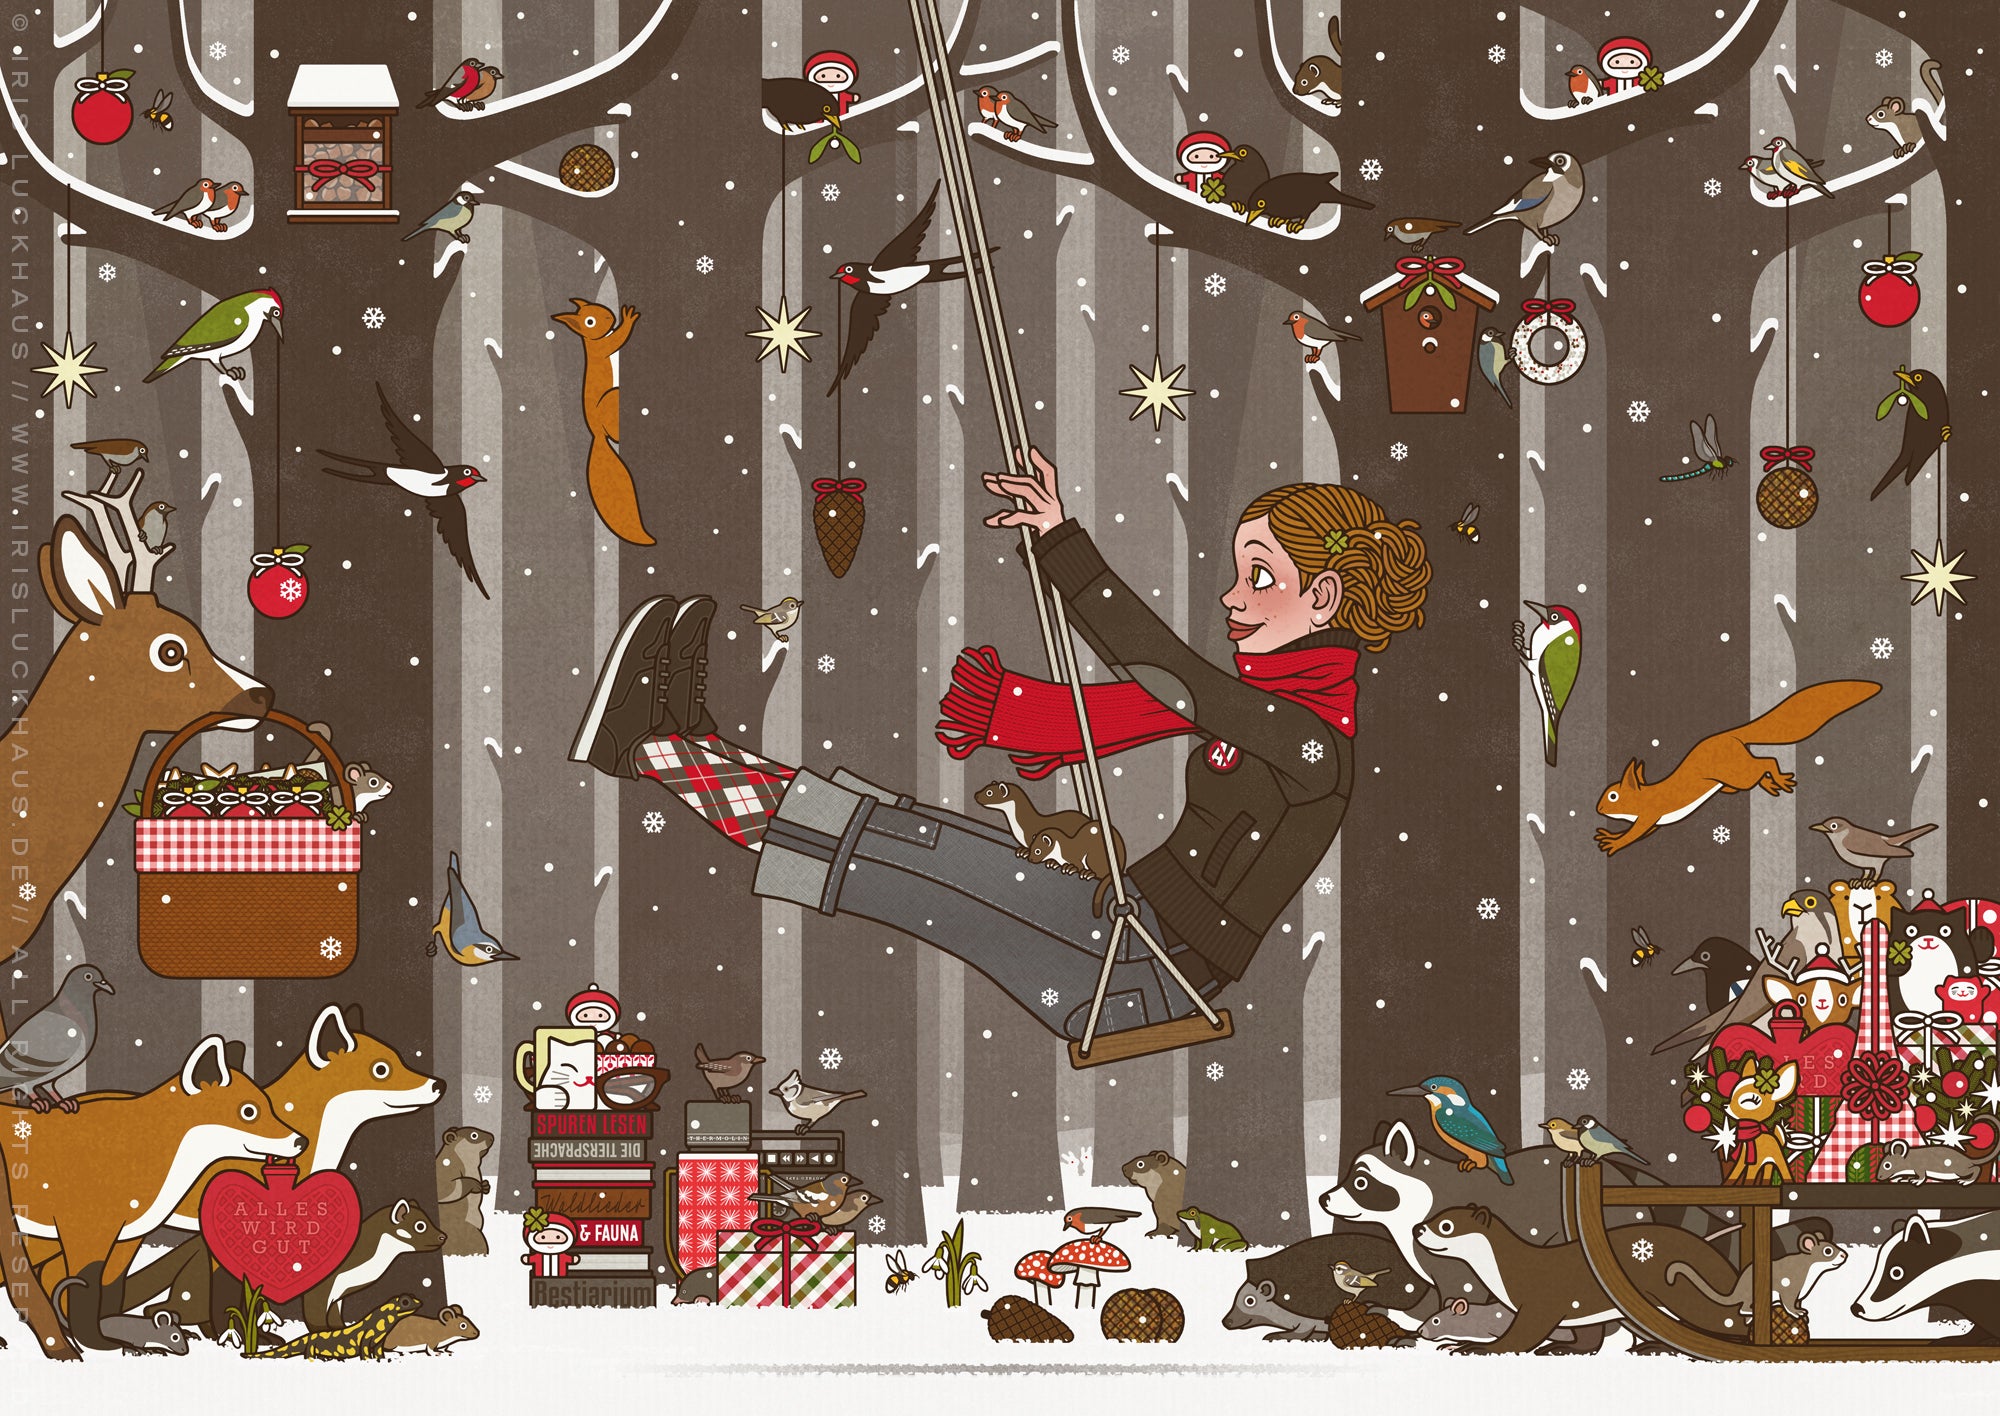 A holiday card features a woman on a swing in a festive, snowy scene.